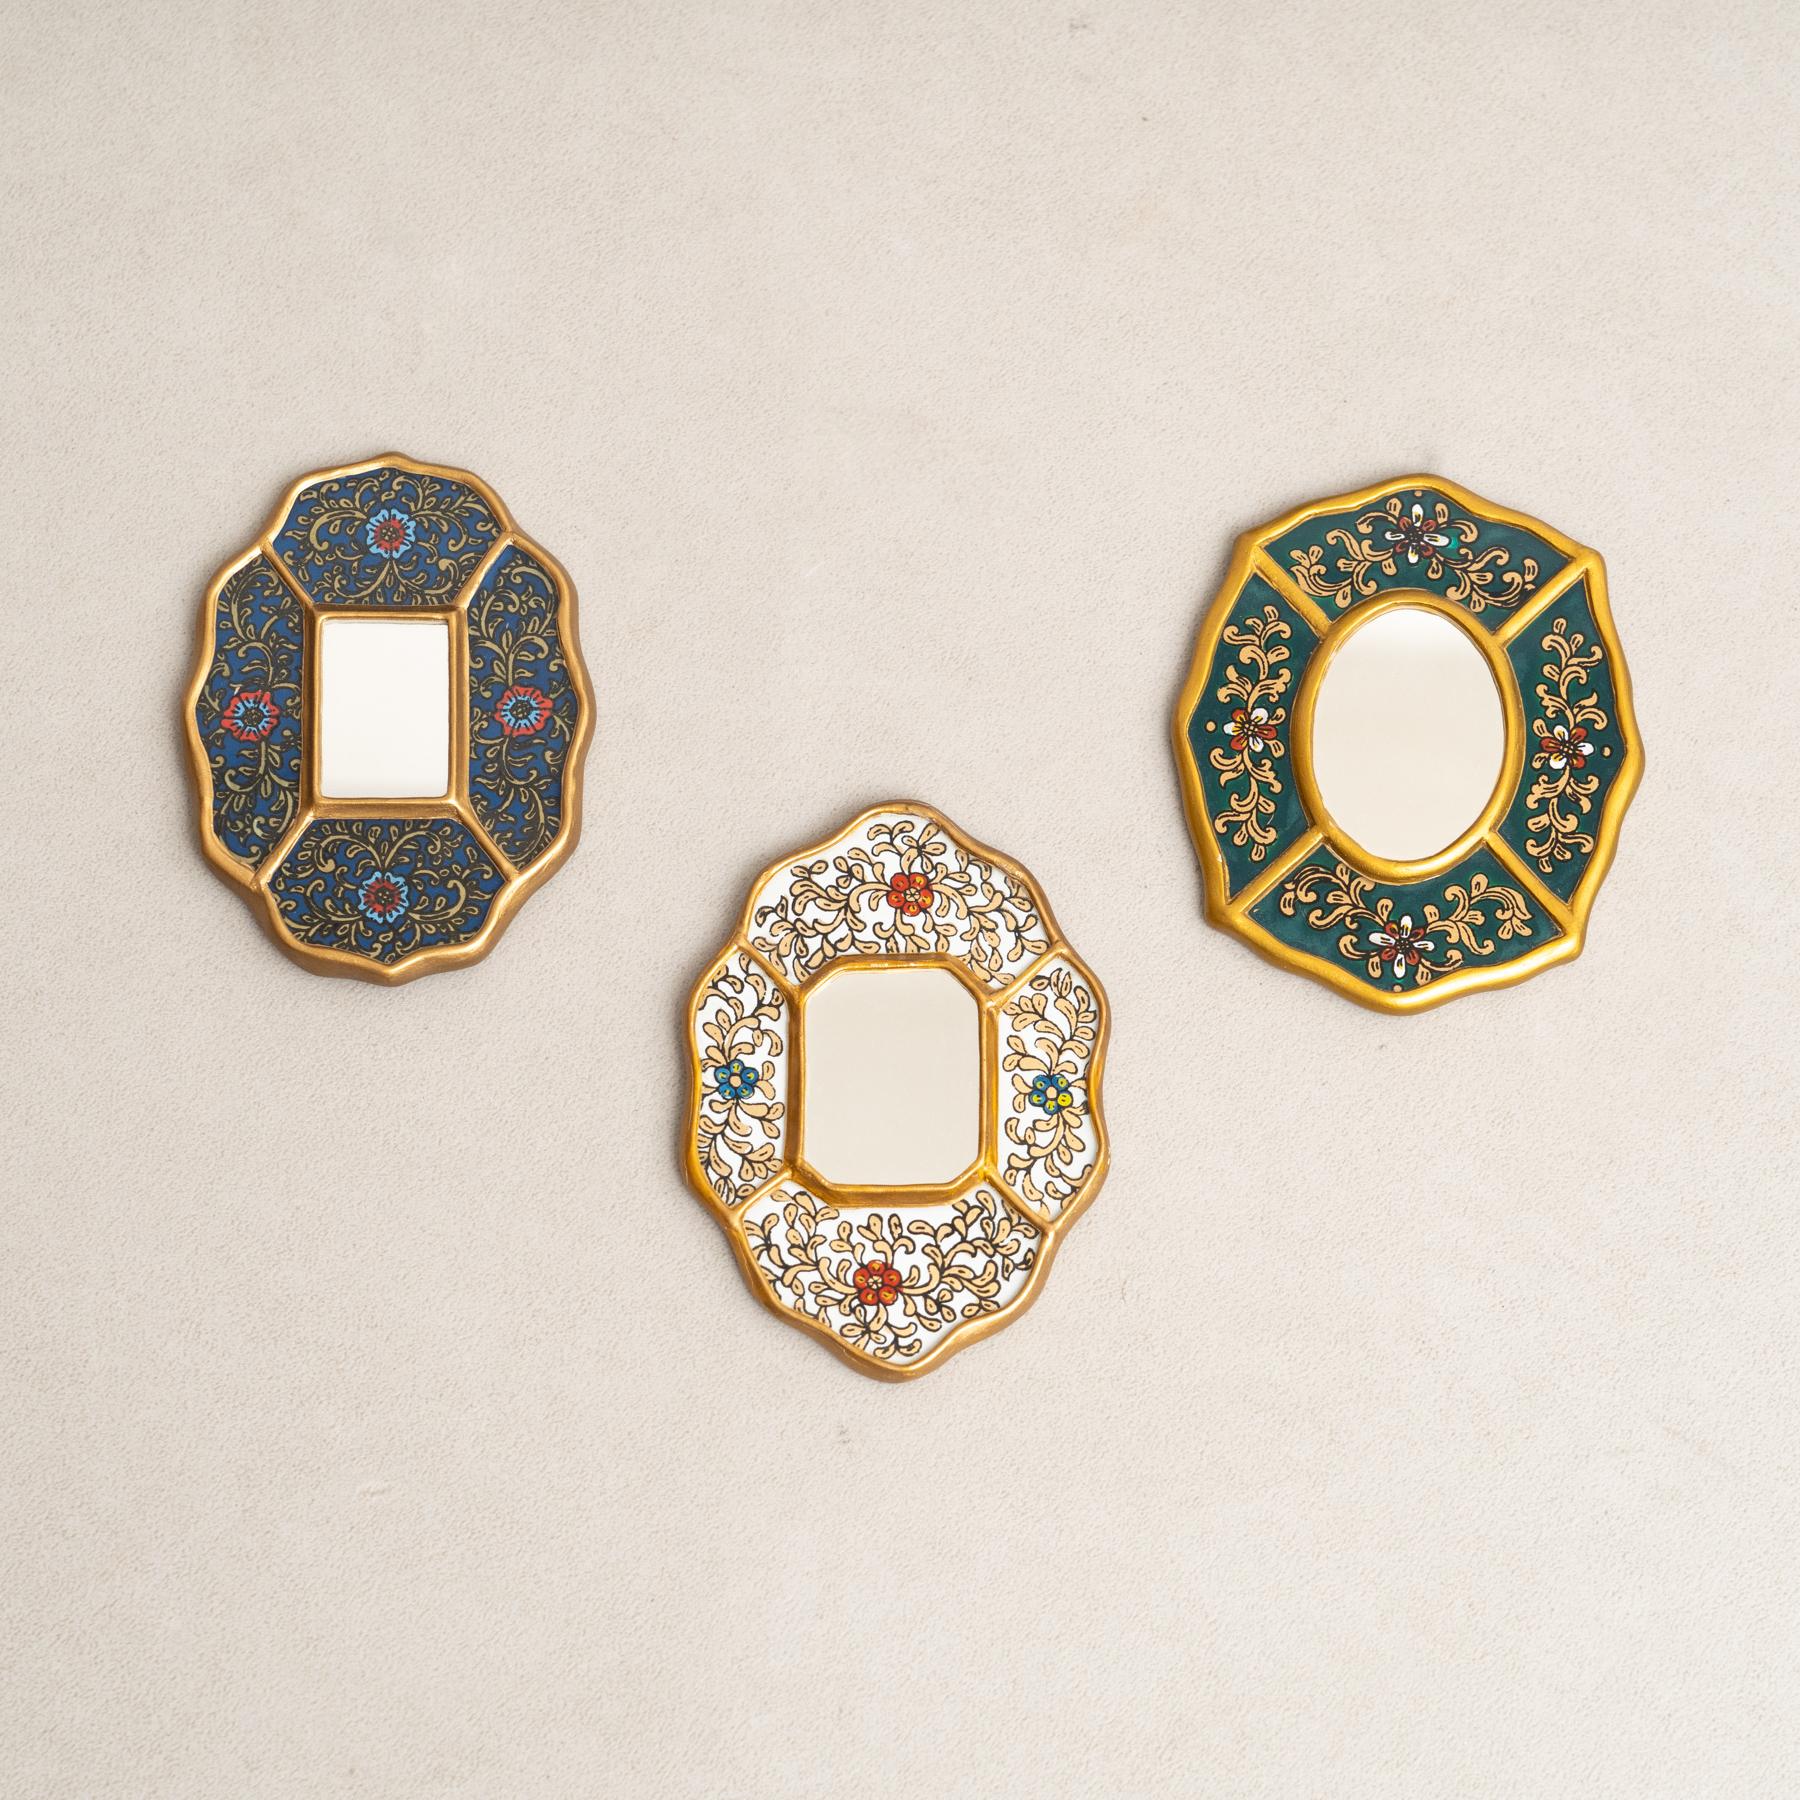 Set of Three Vintage Peruvian Mid-Century Hand-Painted Wooden Wall Mirrors.

Step into a time capsule of elegance with this captivating set of three small mirrors, hailing from 1960s Peru. Crafted with meticulous hand-painted details on wood, each